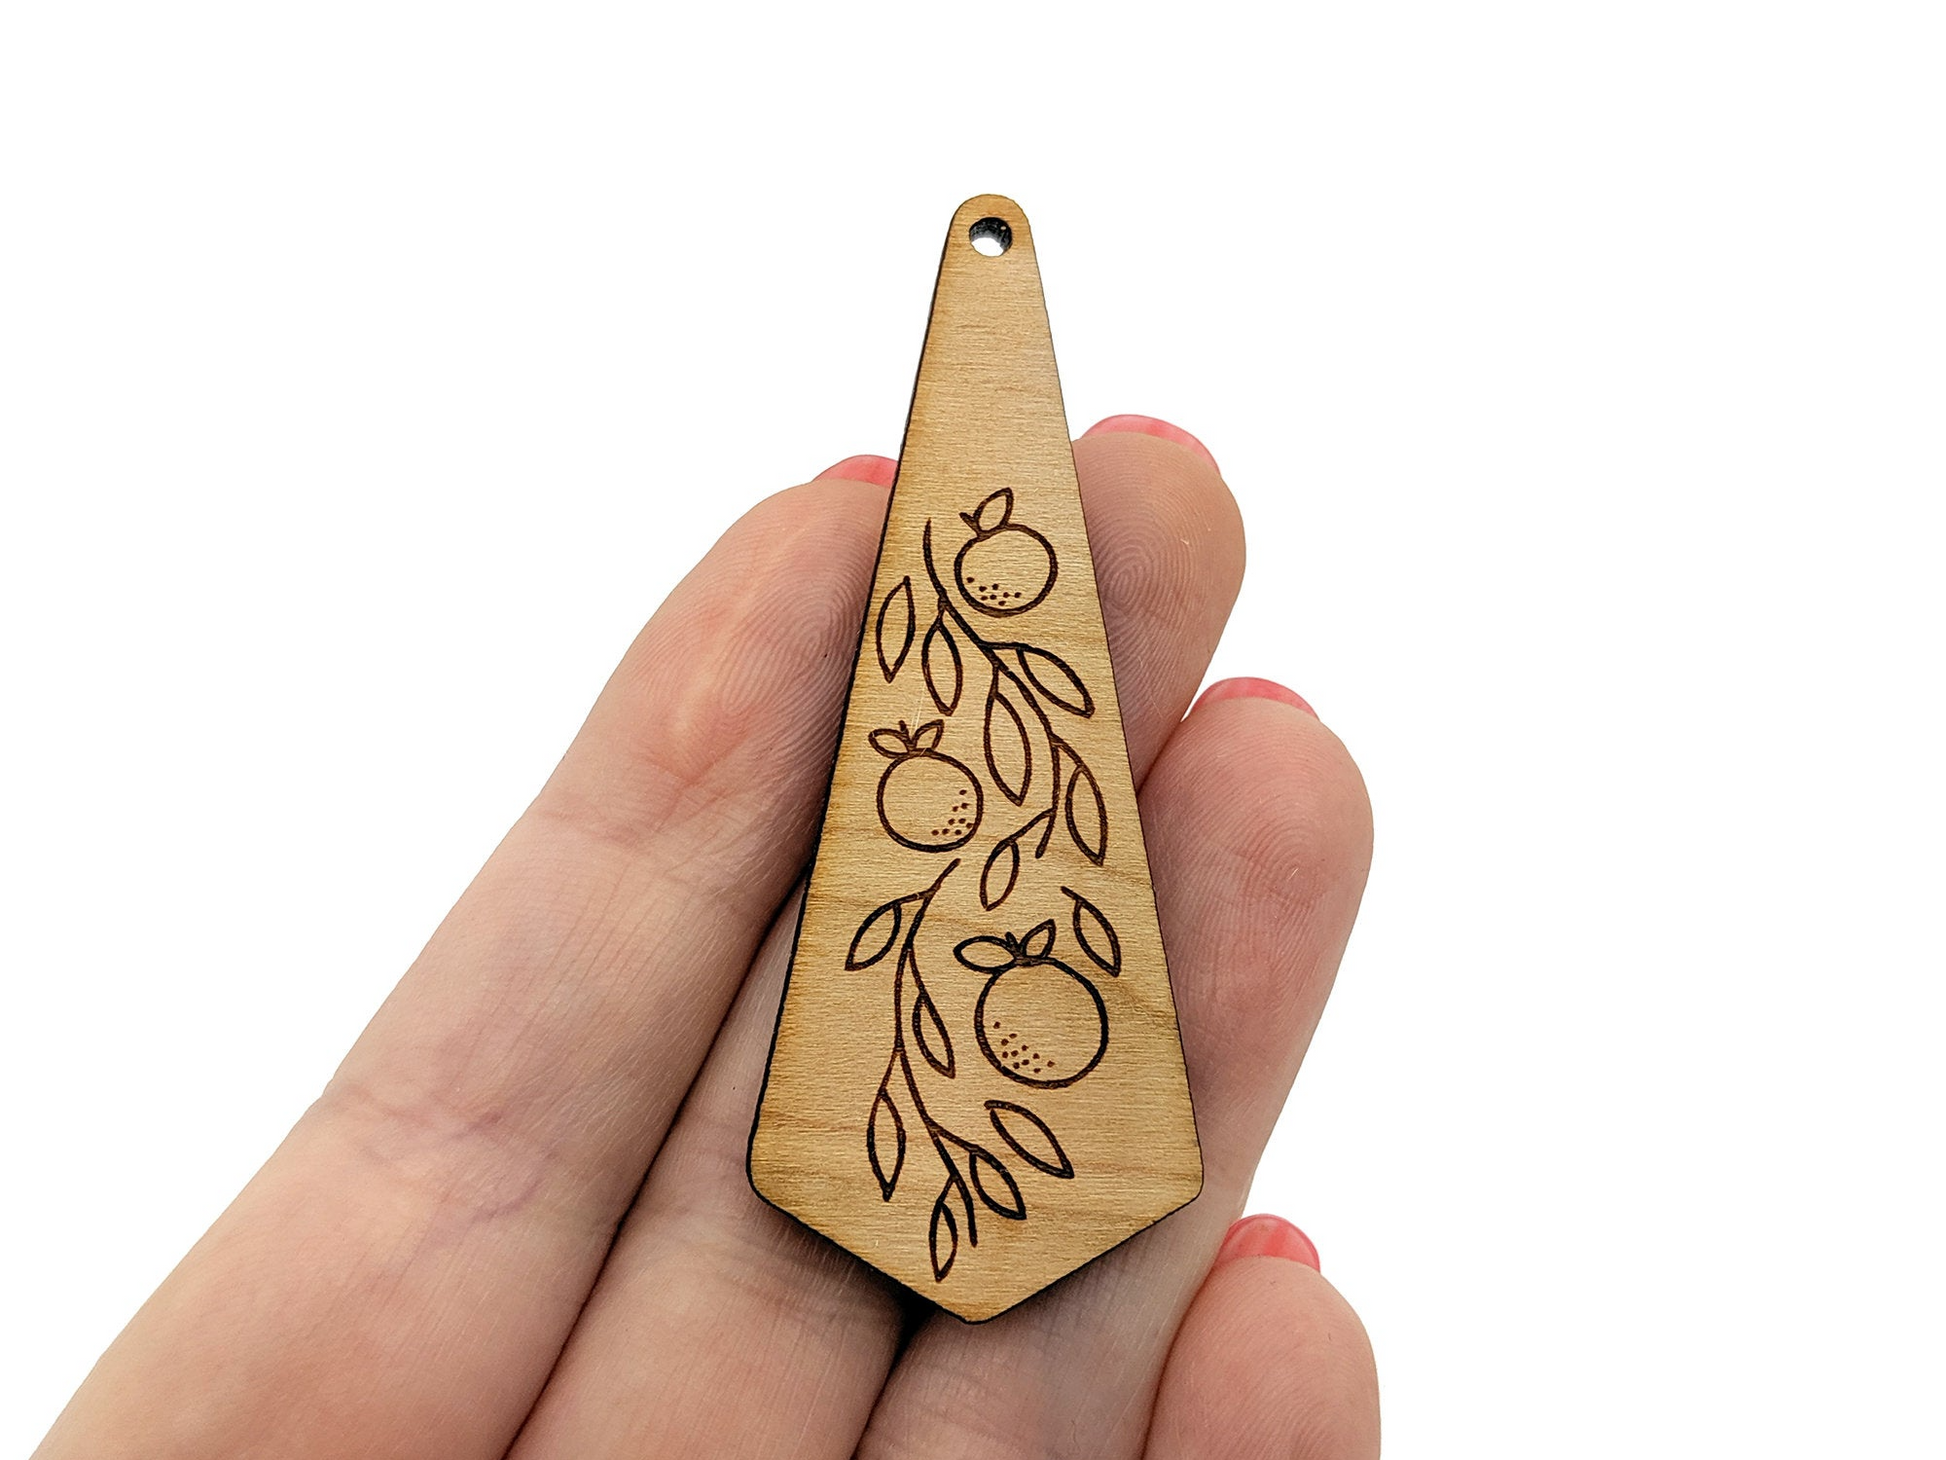 a hand holding a wooden ornament with a design on it